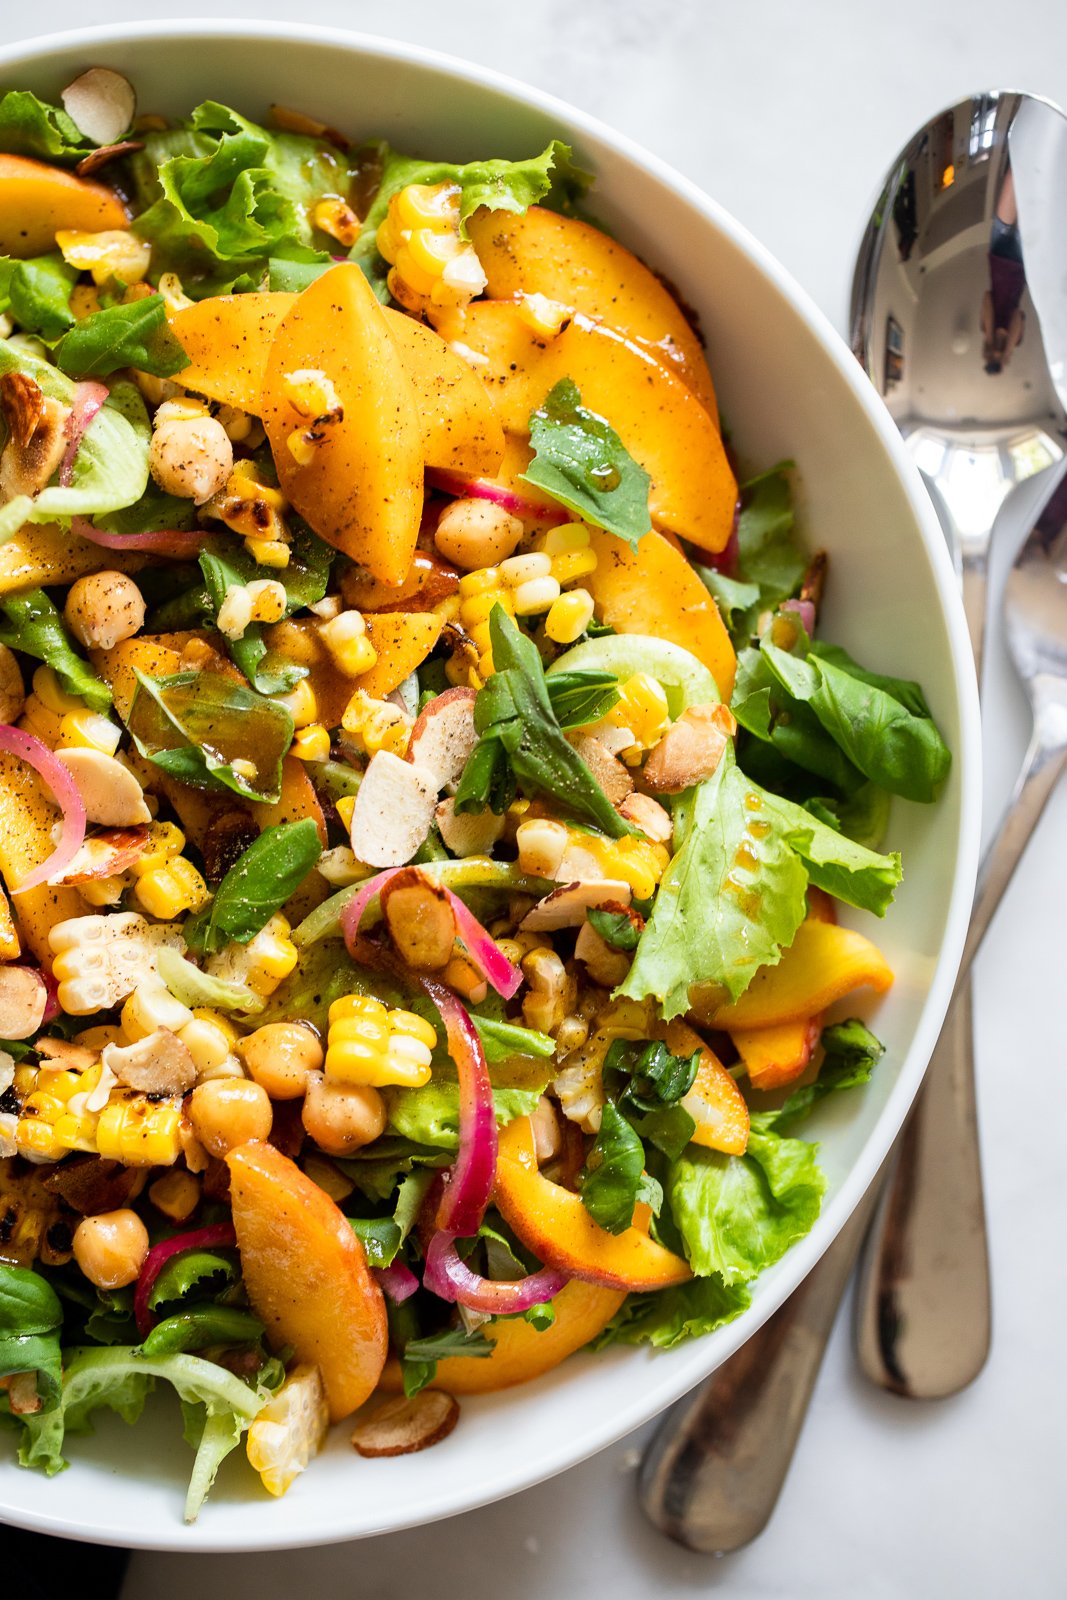 Summer Peach Salad with Corn, Almonds, and Chickpeas